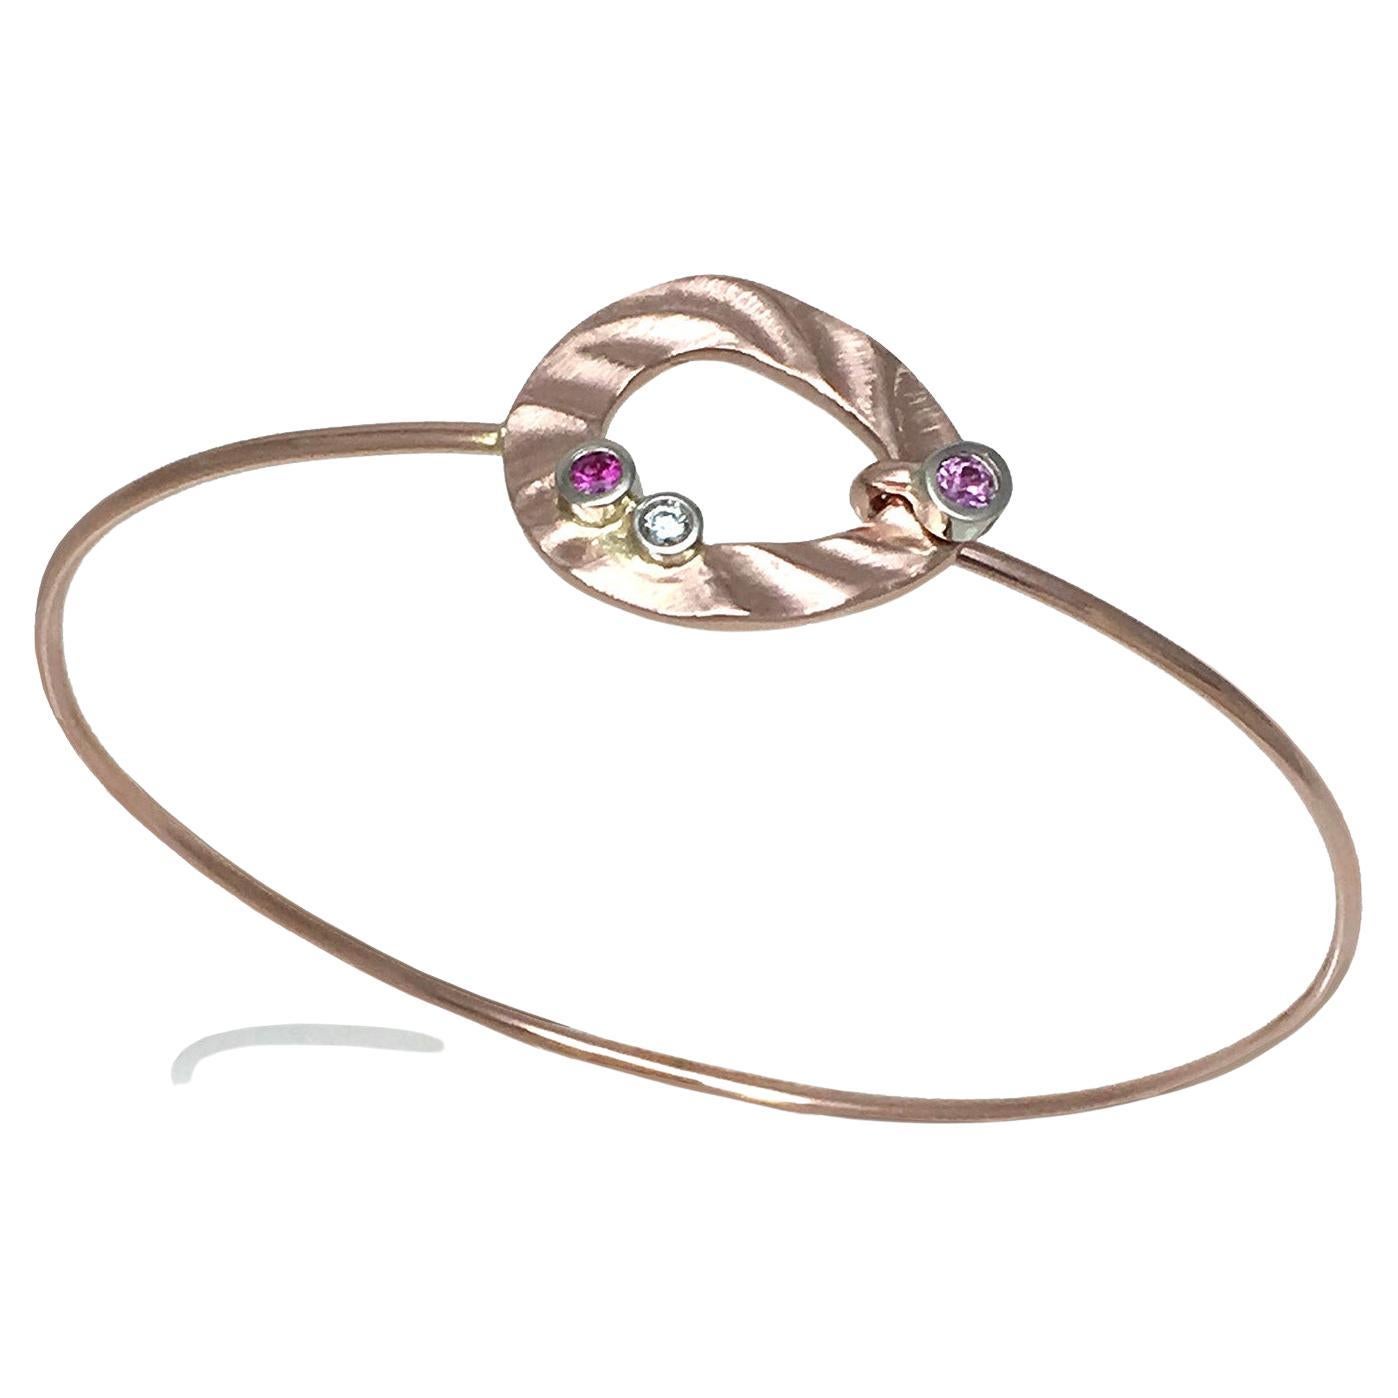 14 Karat Rose Gold Open Pebble Bracelet with Sapphires and Diamond Accents -  